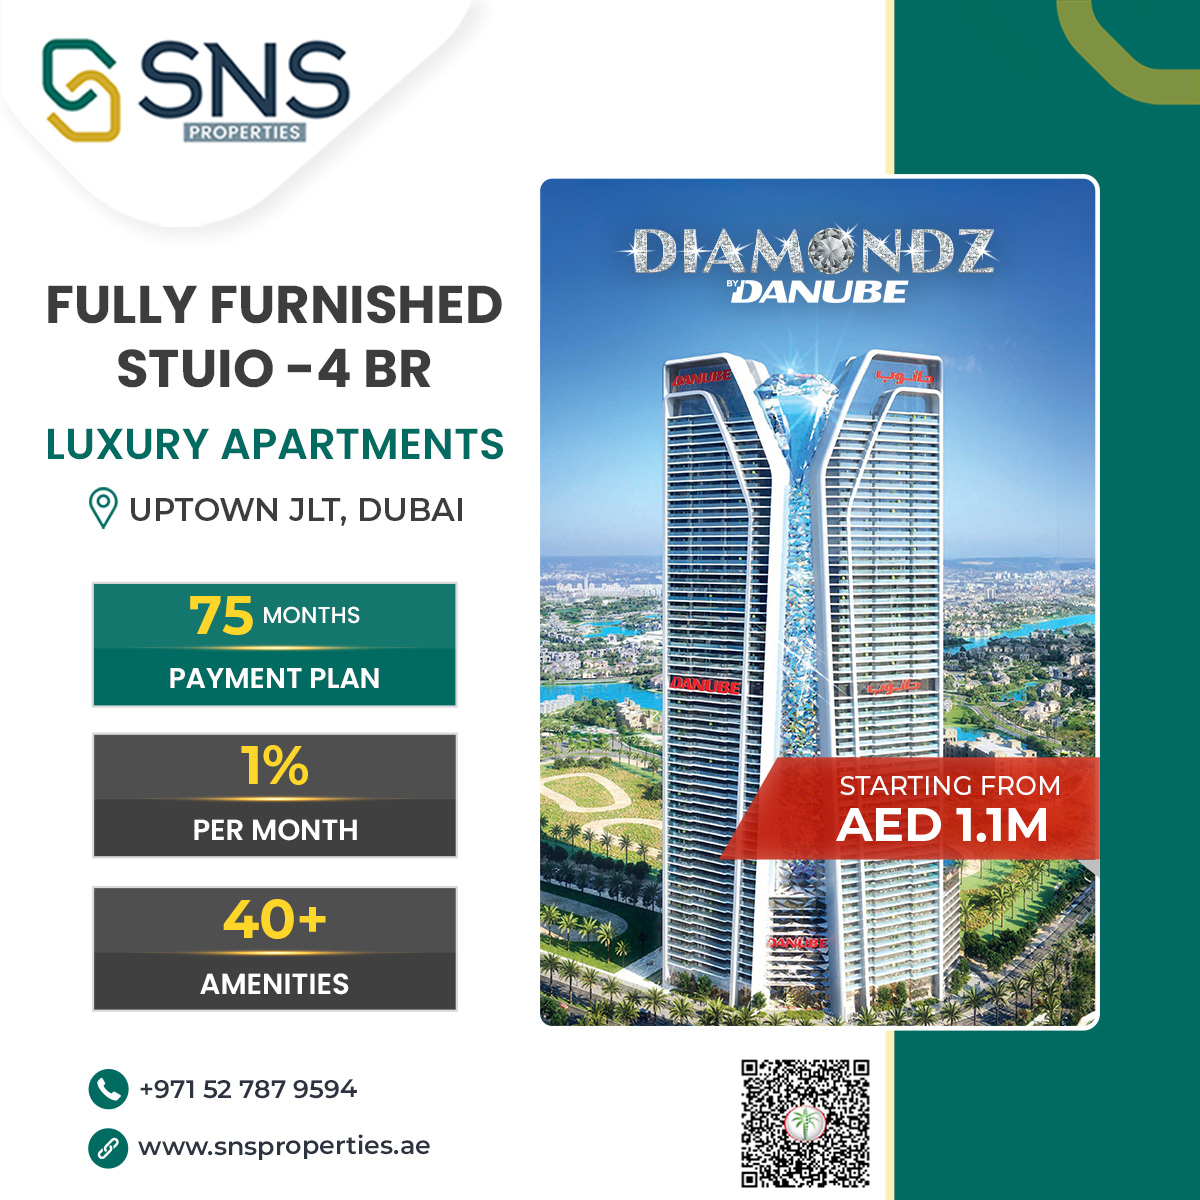 ✨✨ Luxurious living awaits at Diamondz by Danube in Jumeirah Lake Towers (JLT), Dubai. 

Prices start at AED 1.1 million with a 75-month payment plan of 1% per month.

#Diamondzbydanube #LuxuryLiving #DubaiRealEstate #JLT 
#danube #investindubai #snsproperties